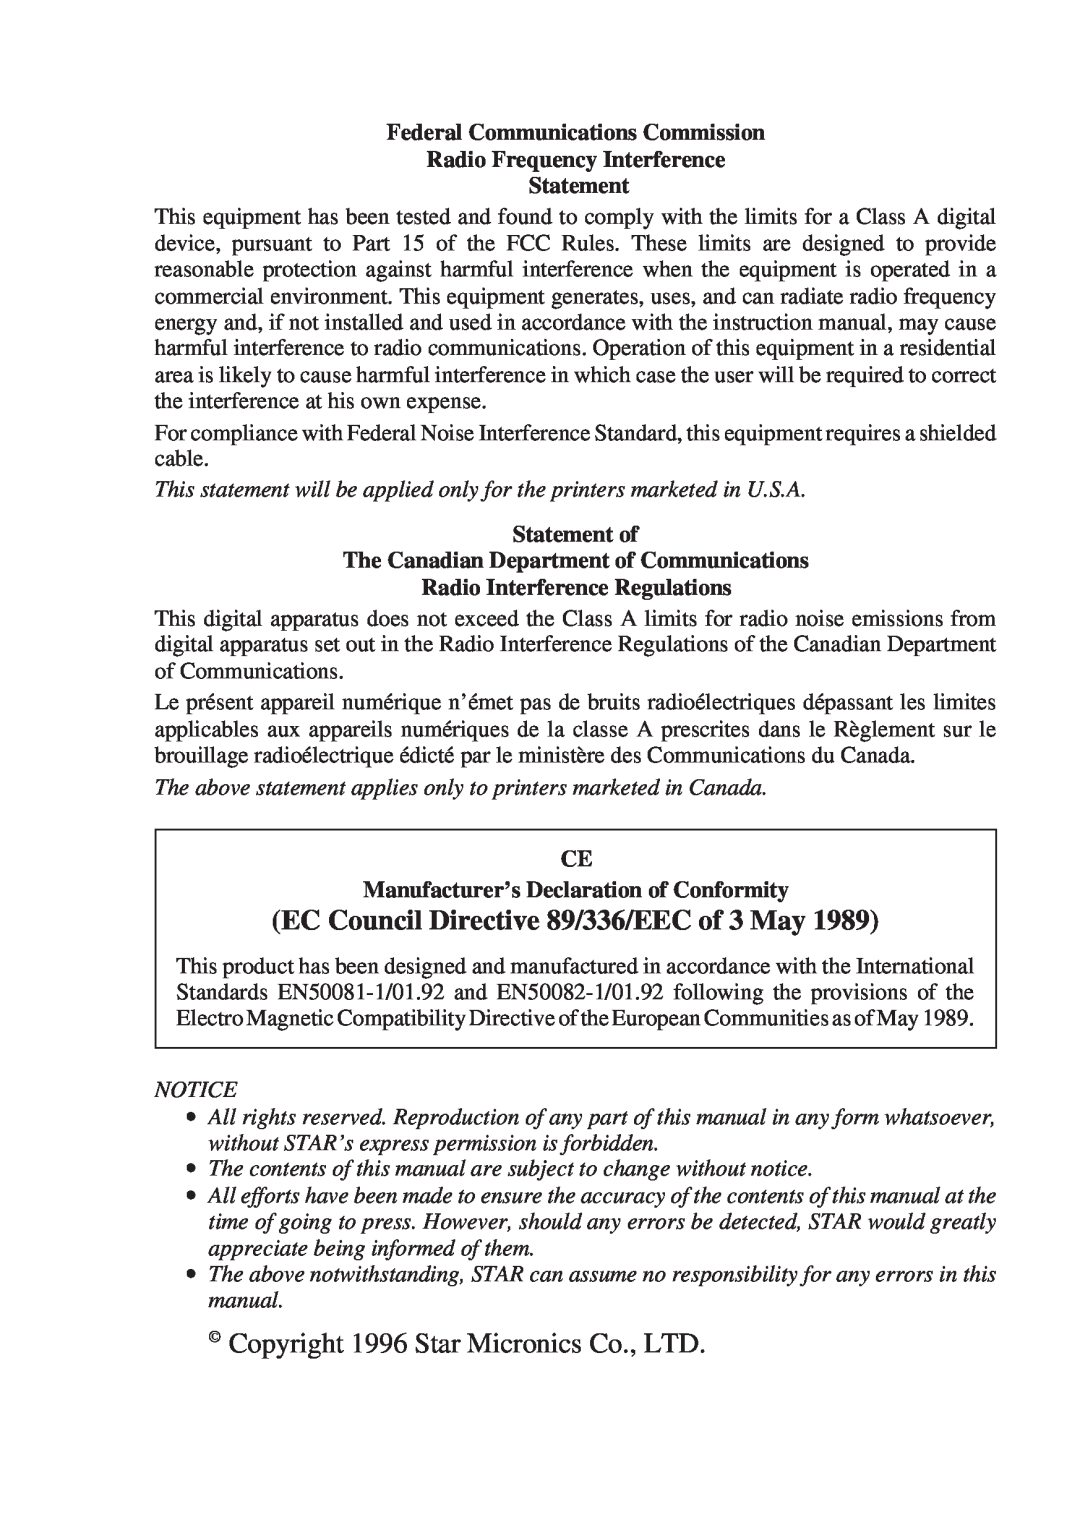 Star Micronics 347F user manual EC Council Directive 89/336/EEC of 3 May, Statement, Radio Interference Regulations 